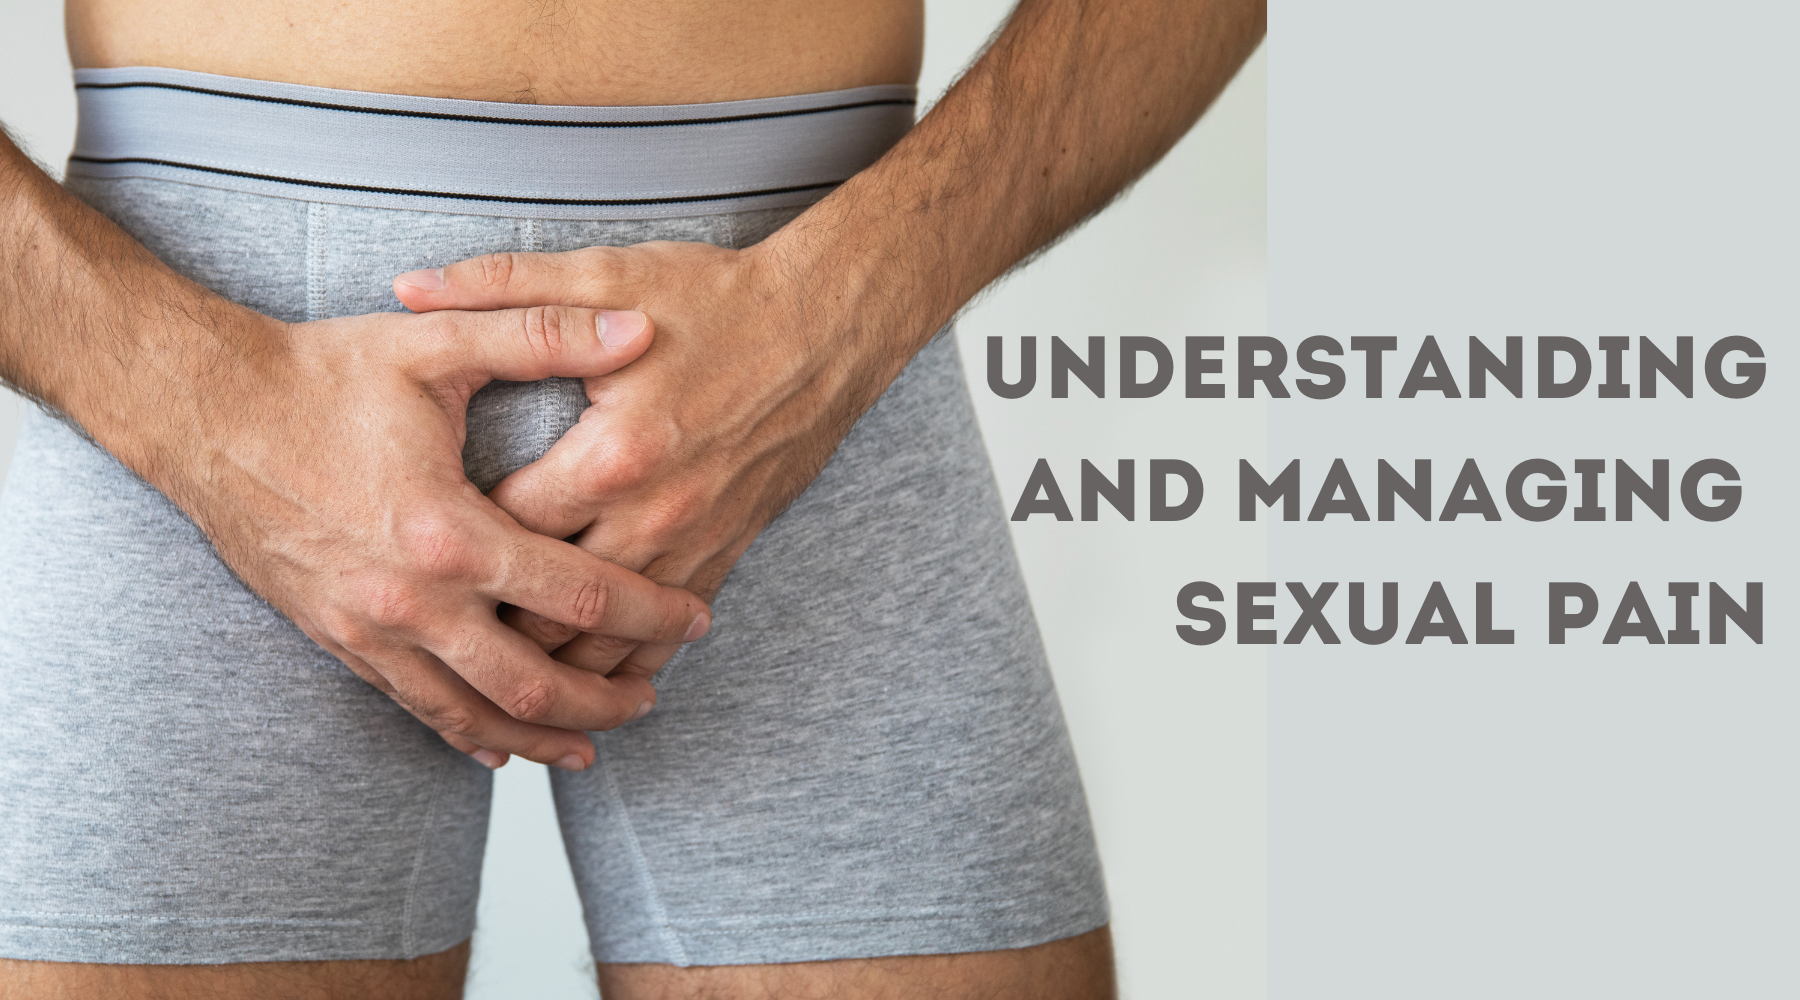 UNDERSTANDING AND MANAGING SEXUAL PAIN